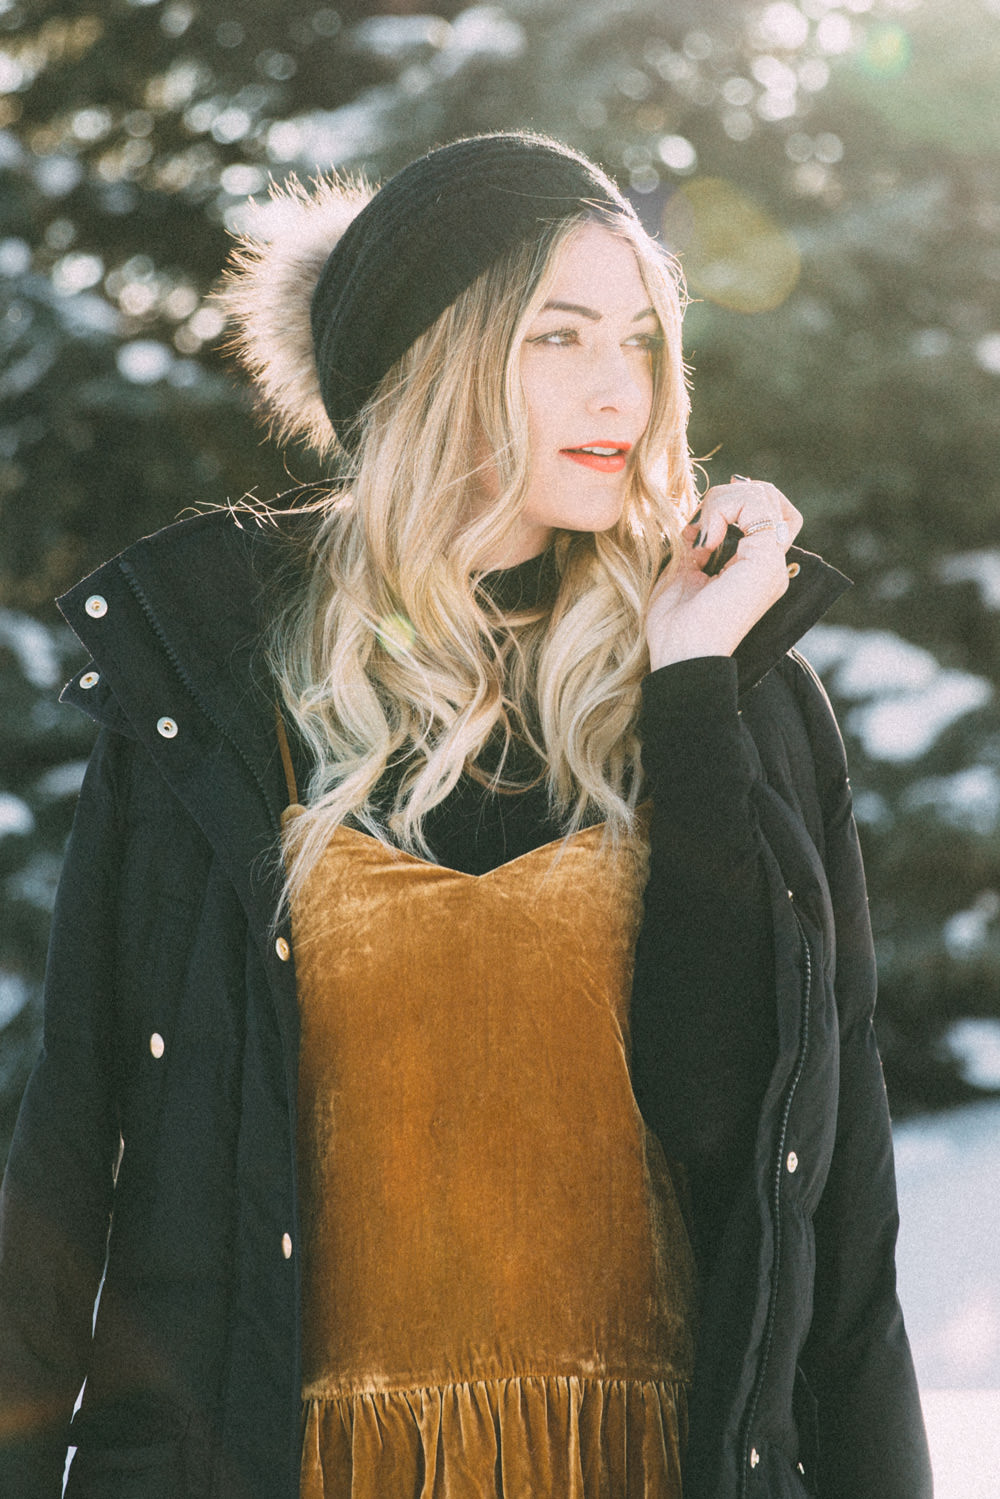 Caitlin Lindquist of Dash of Darling shares a winter outfit in Jackson Wyoming wearing a velvet camisole tank top and madewell ripped high rise skinny denim.